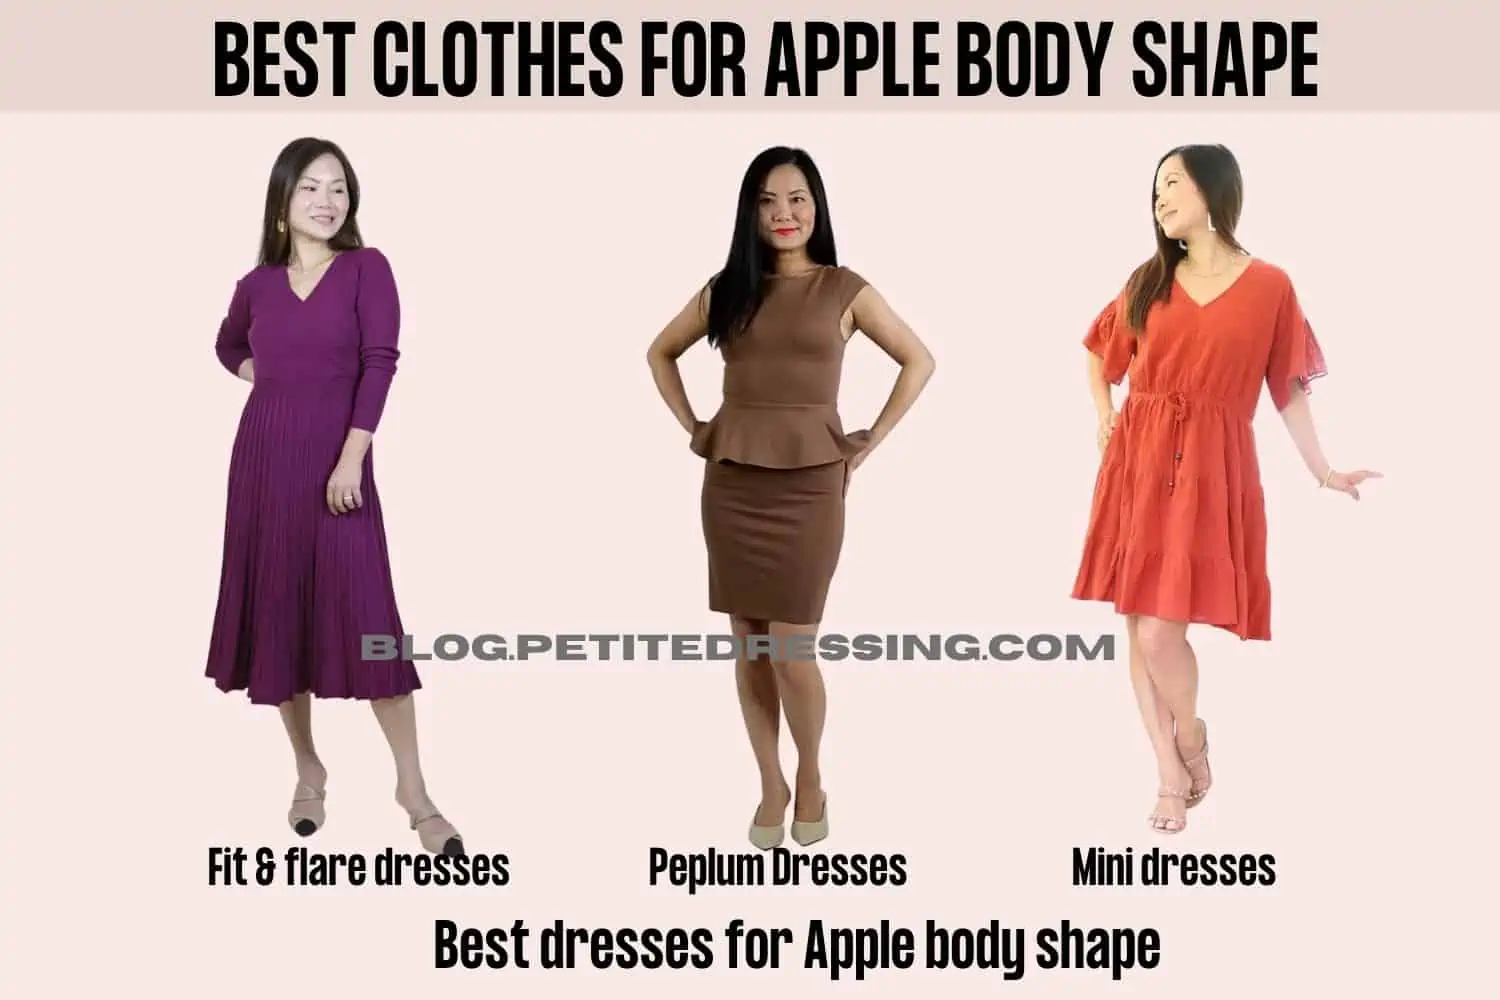 The Five Most Flattering Dresses for YOUR Body Shapes - Love Your Dress